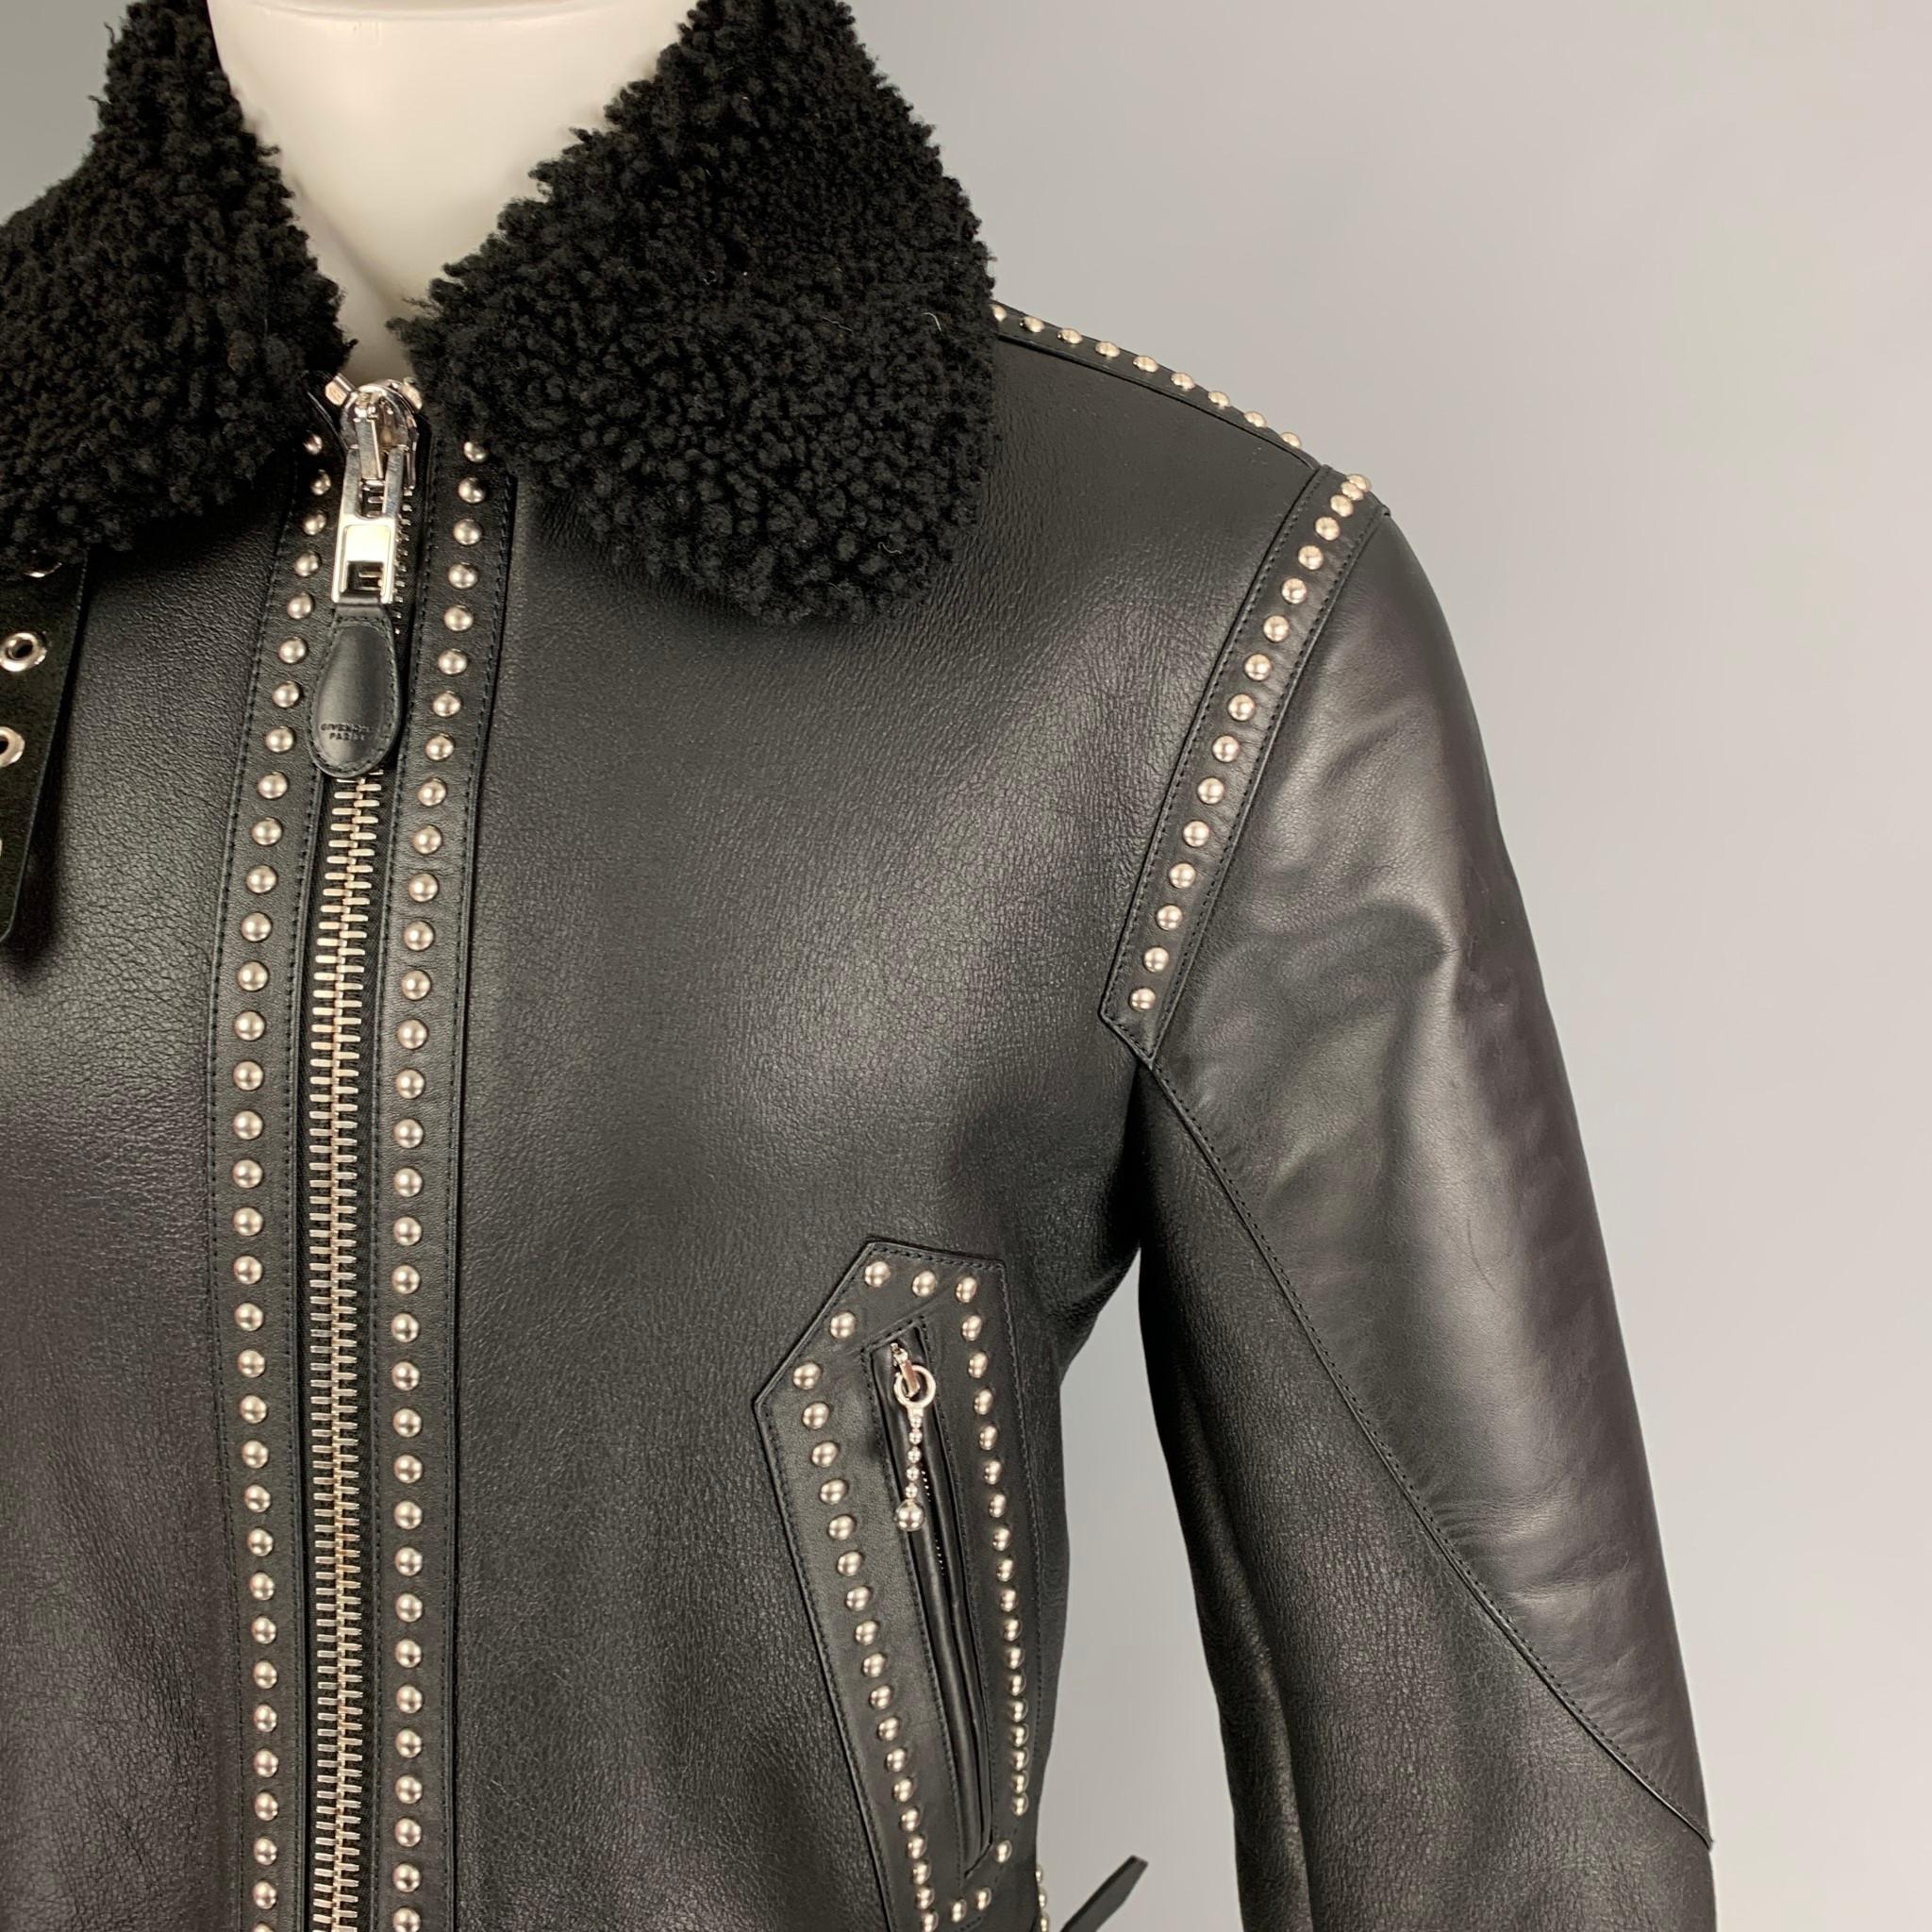 GIVENCHY by Ricardo Tisci FW 2017 jacket comes in a black leather featuring a blouson style, shearling collar, silver tone studded details, zipper pockets, side tab details, and a full zip up closure. 

New With Tags.
Marked: 48
Original Retail